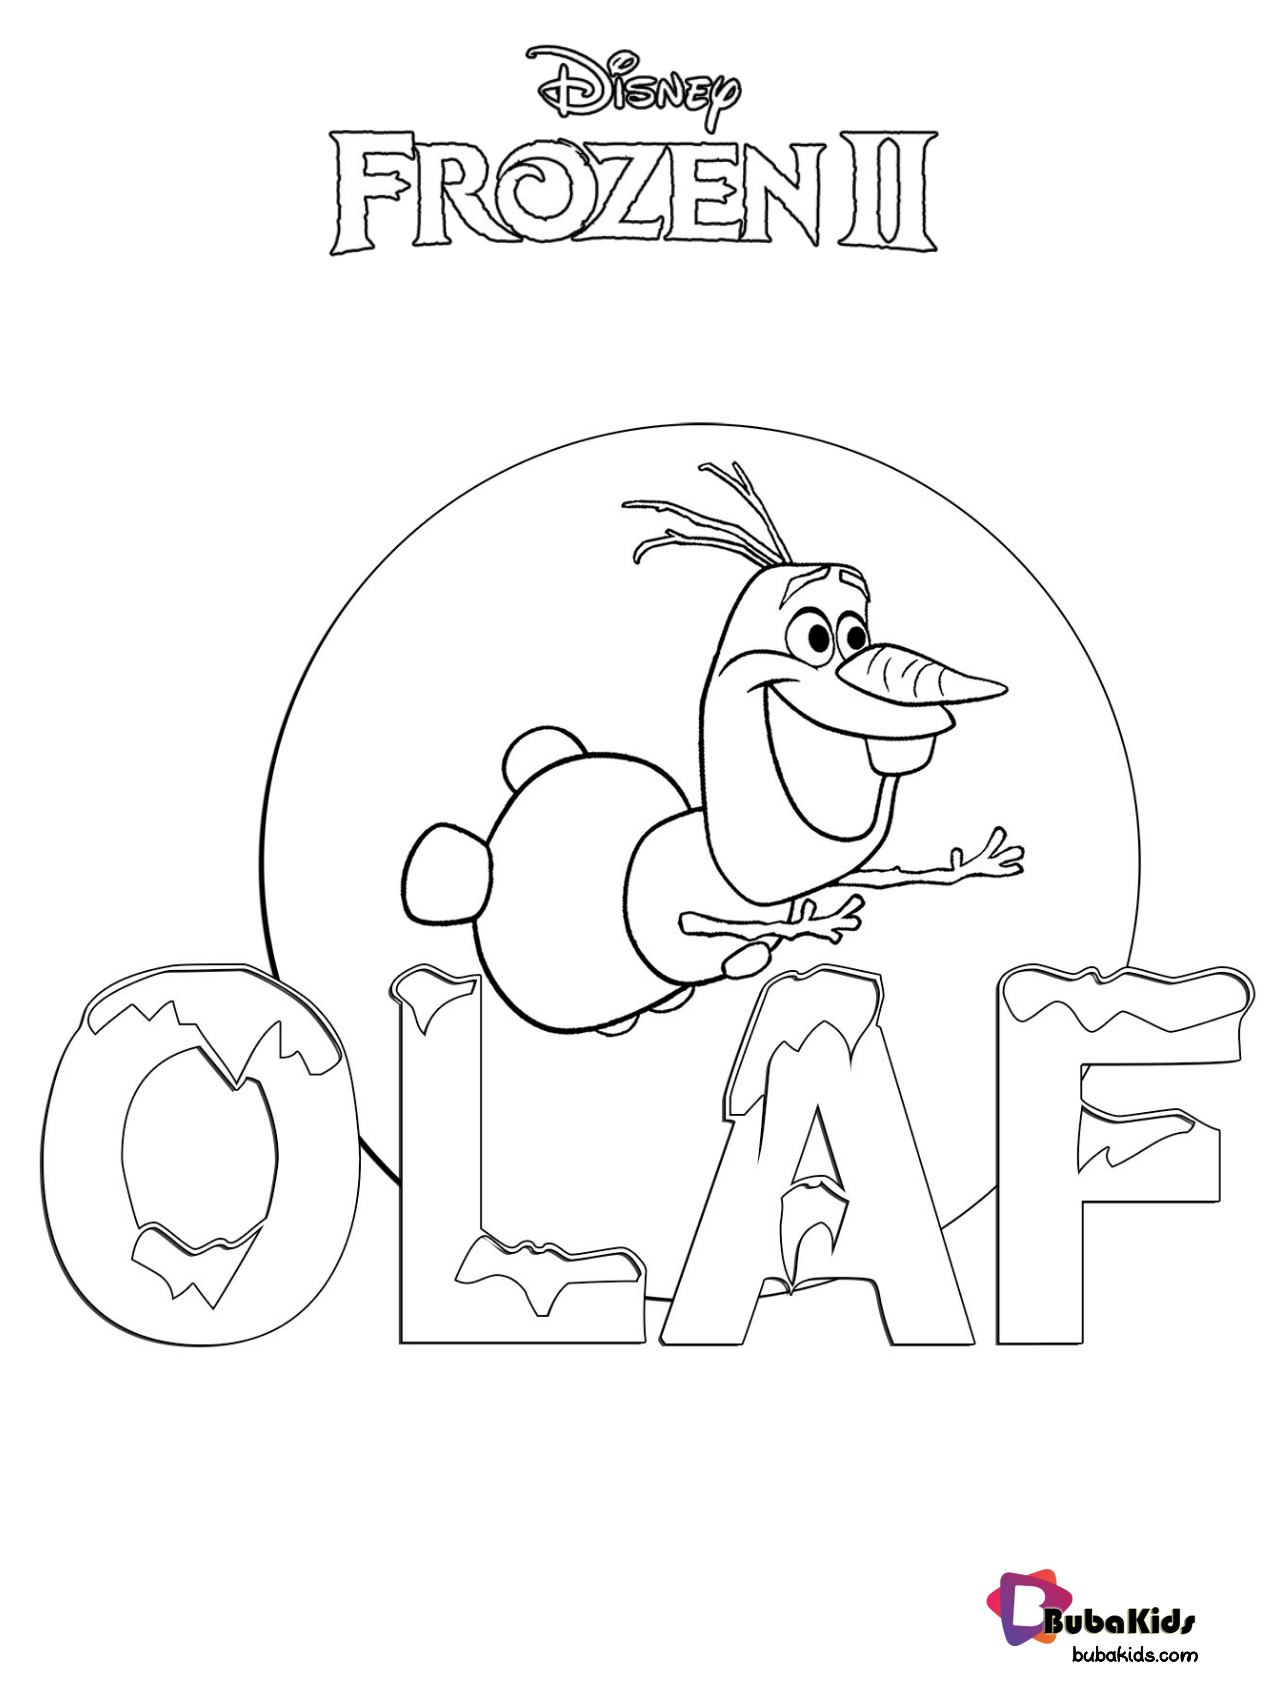 Frozen 2 Olaf the snowman coloring page. Wallpaper